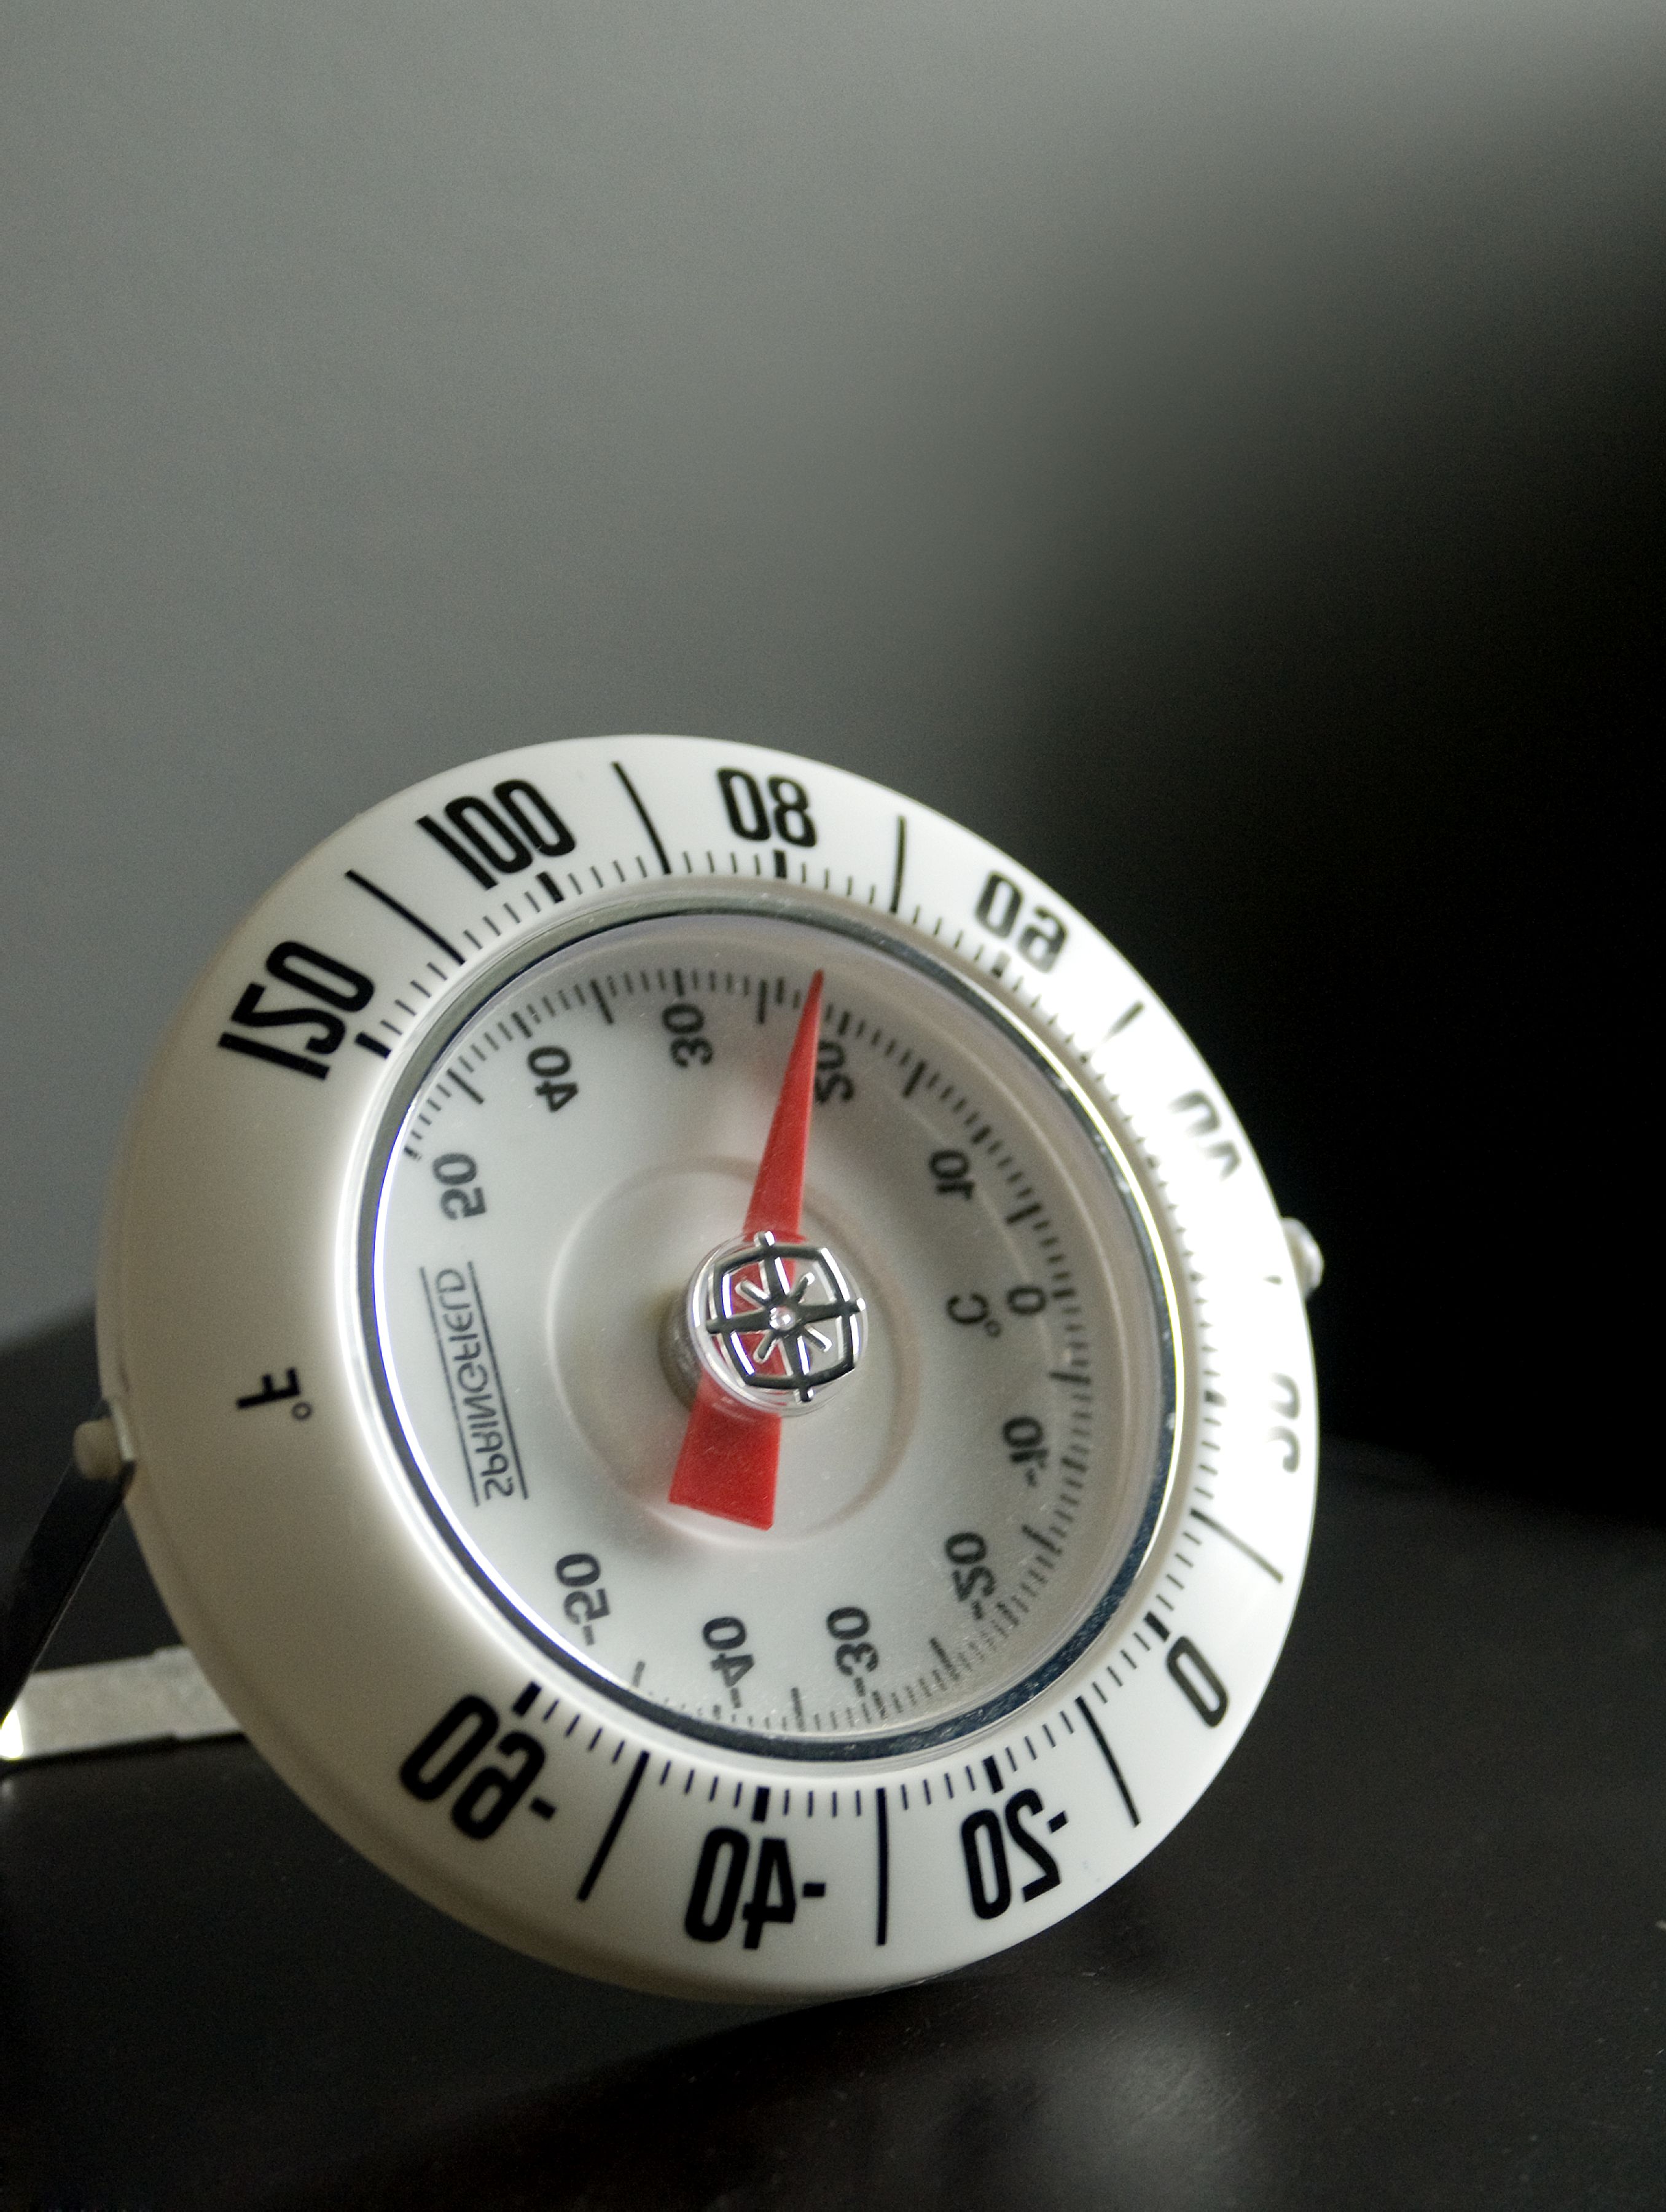 https://pixnio.com/free-images/objects/thermometer-was-reading-a-temperature.jpg